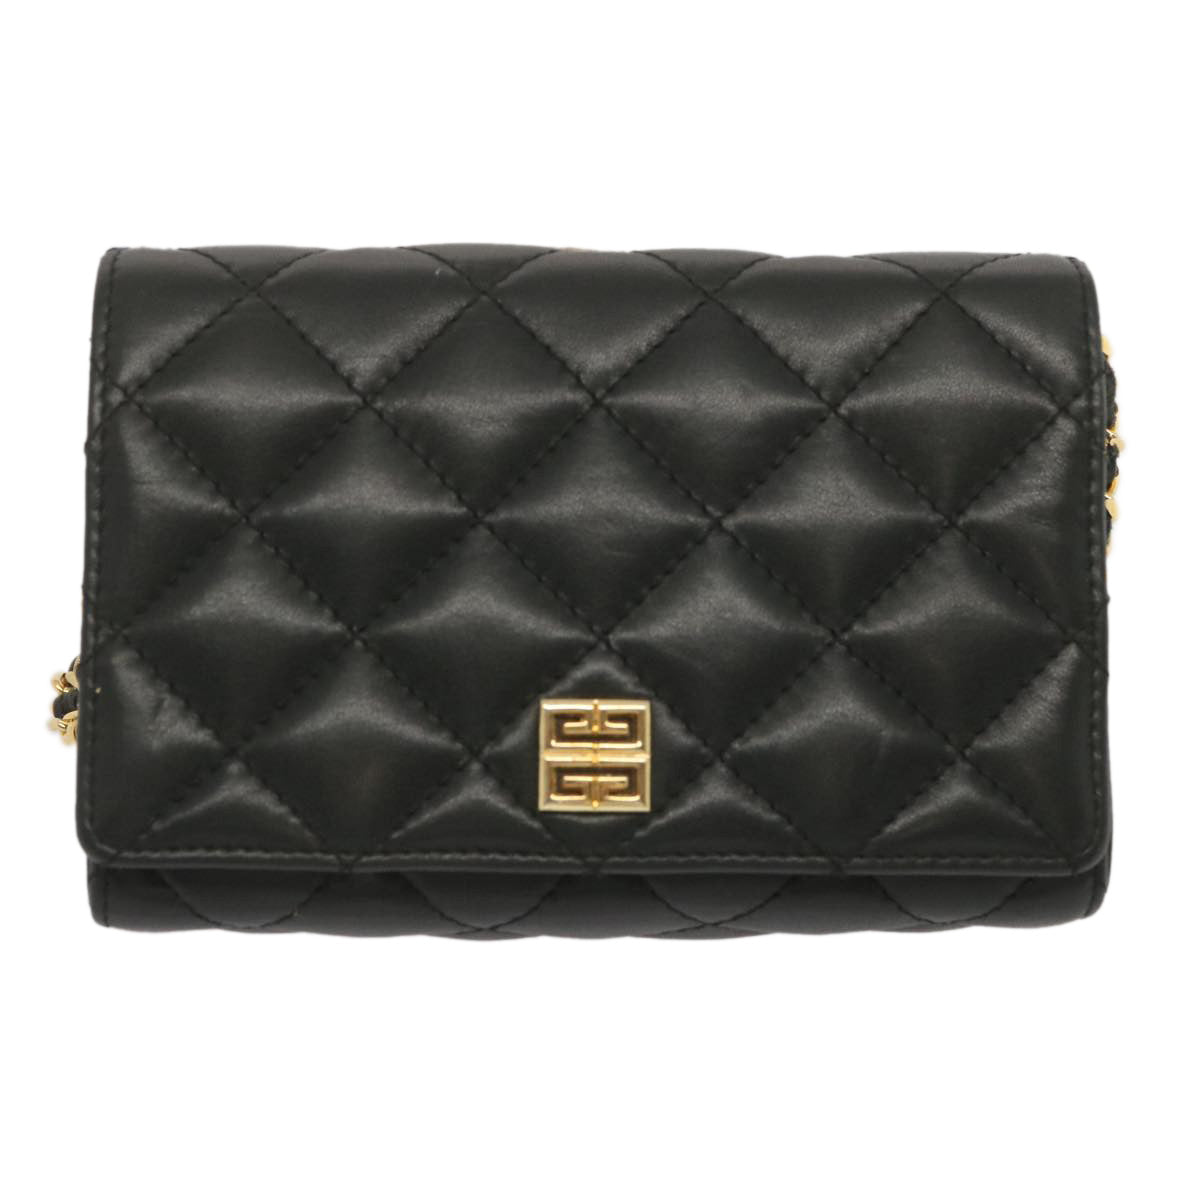 GIVENCHY Quilted Chain Shoulder Bag Leather Black Auth am5981